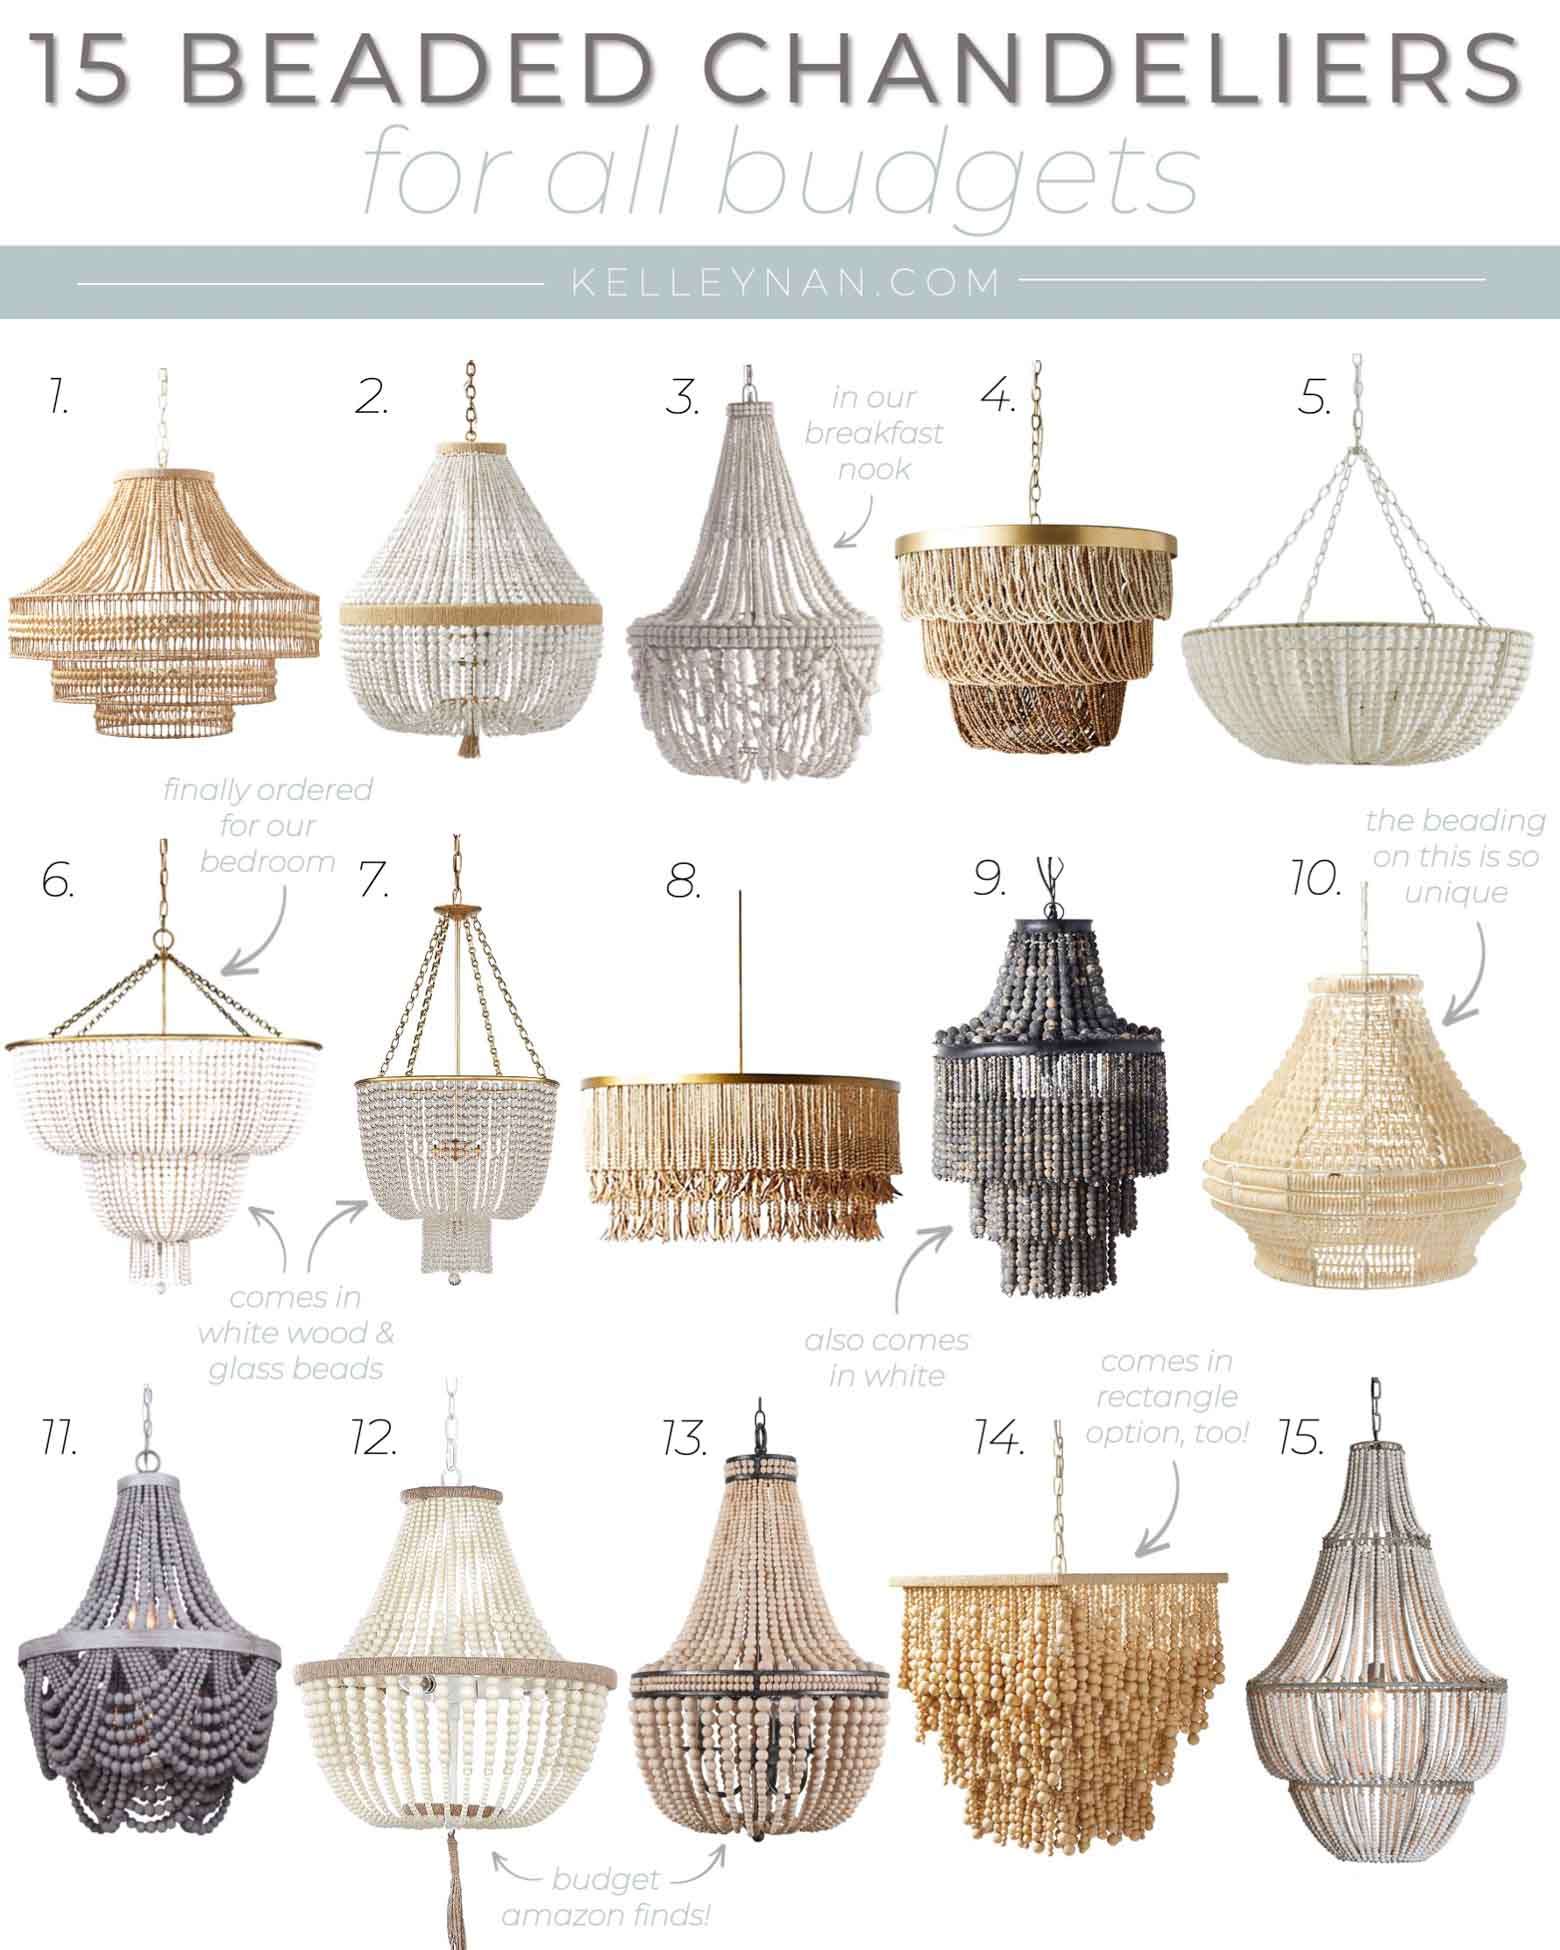 Pretty Beaded Chandeliers for Almost Every Budget! From Glass to Wood Bead Chandeliers & Statement Pendant Light Fixtures